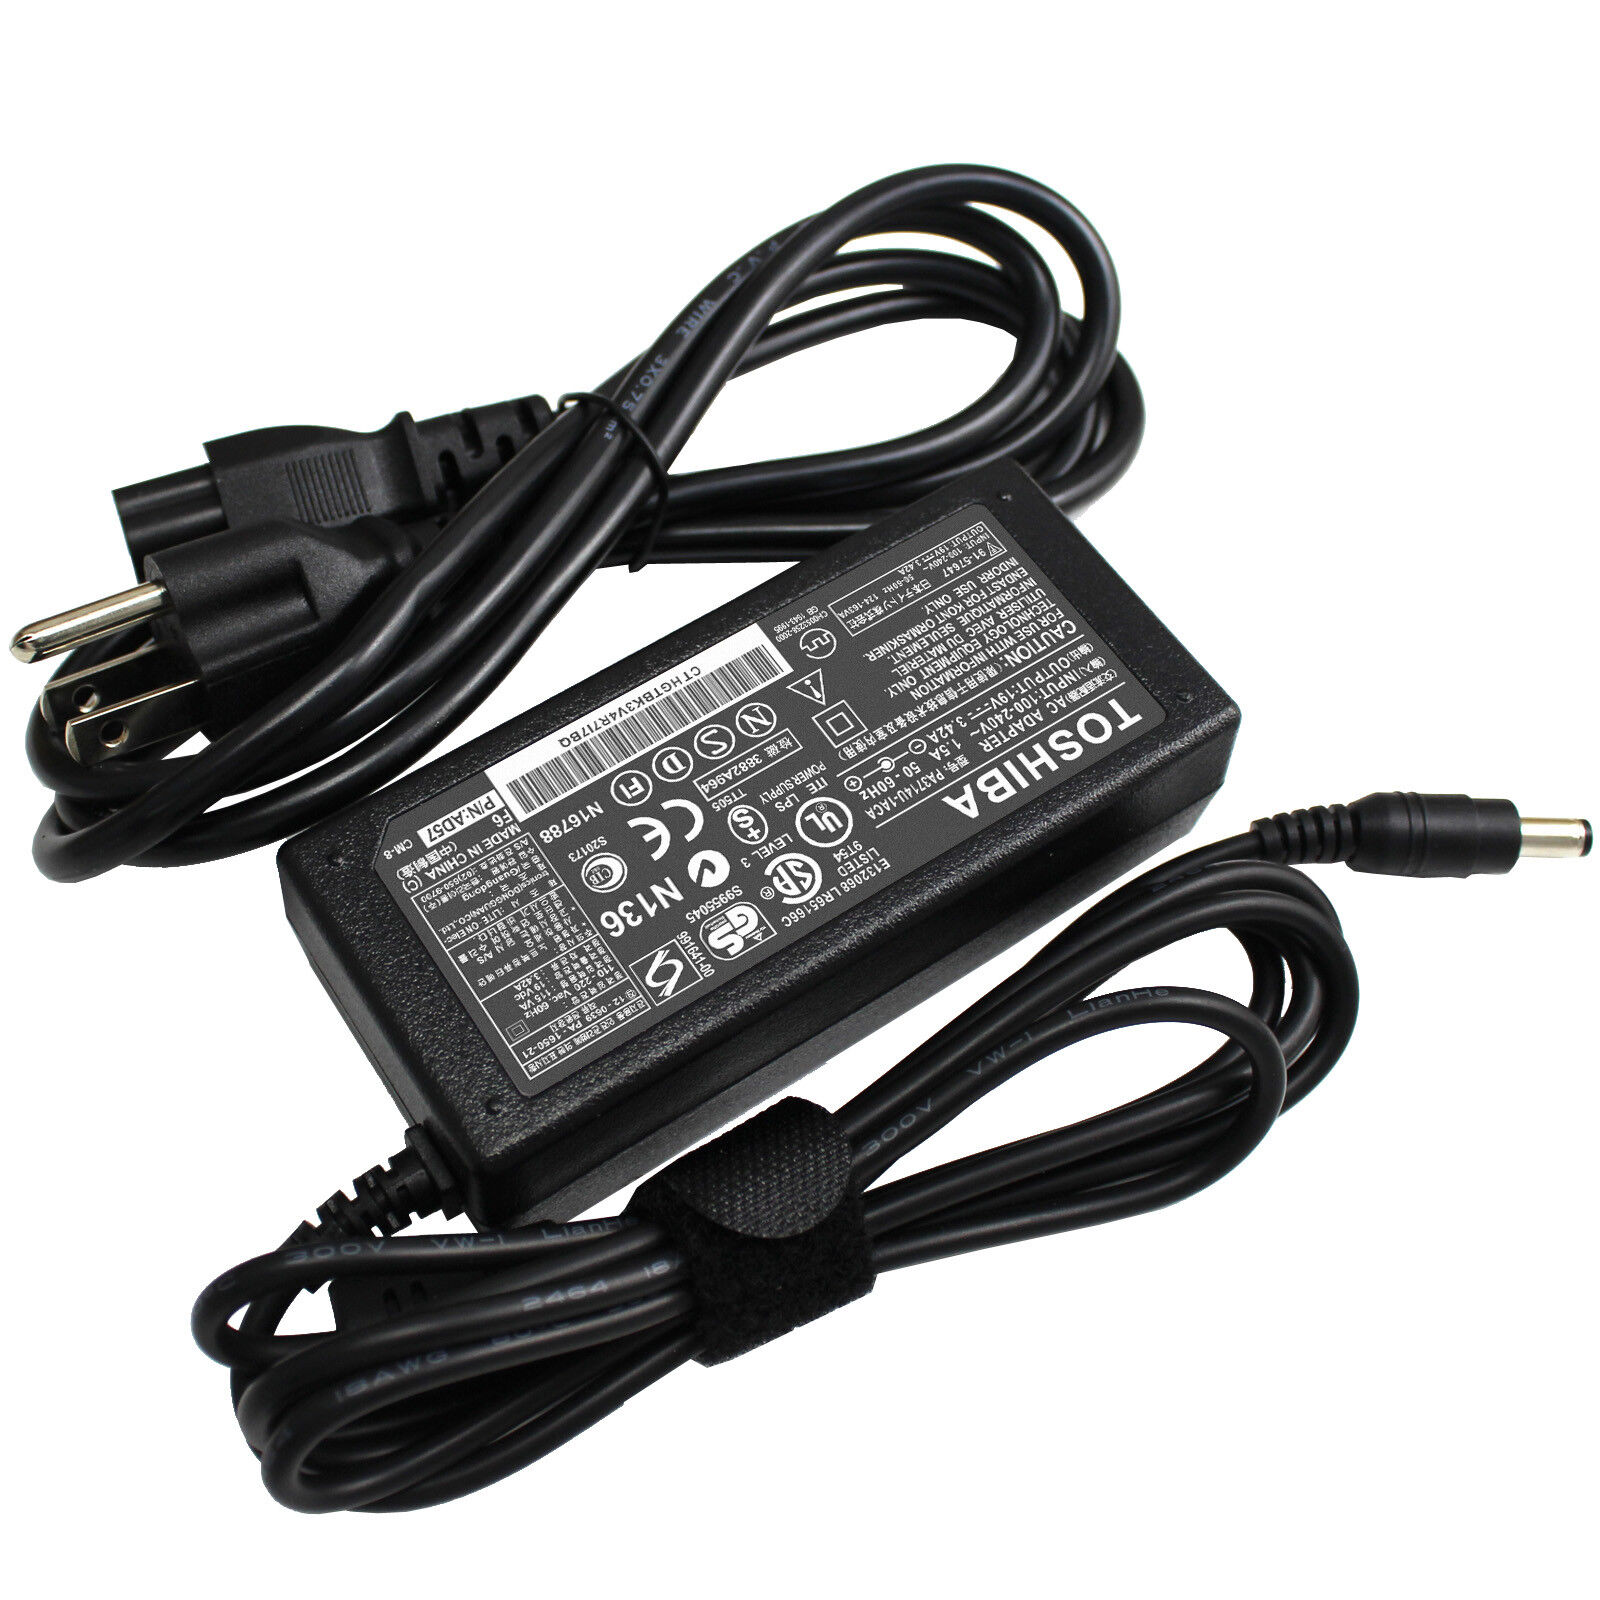 Genuine Toshiba AC Adapter Charger 65W Laptop Power Cord 19V 3.42A C55 C655 C850